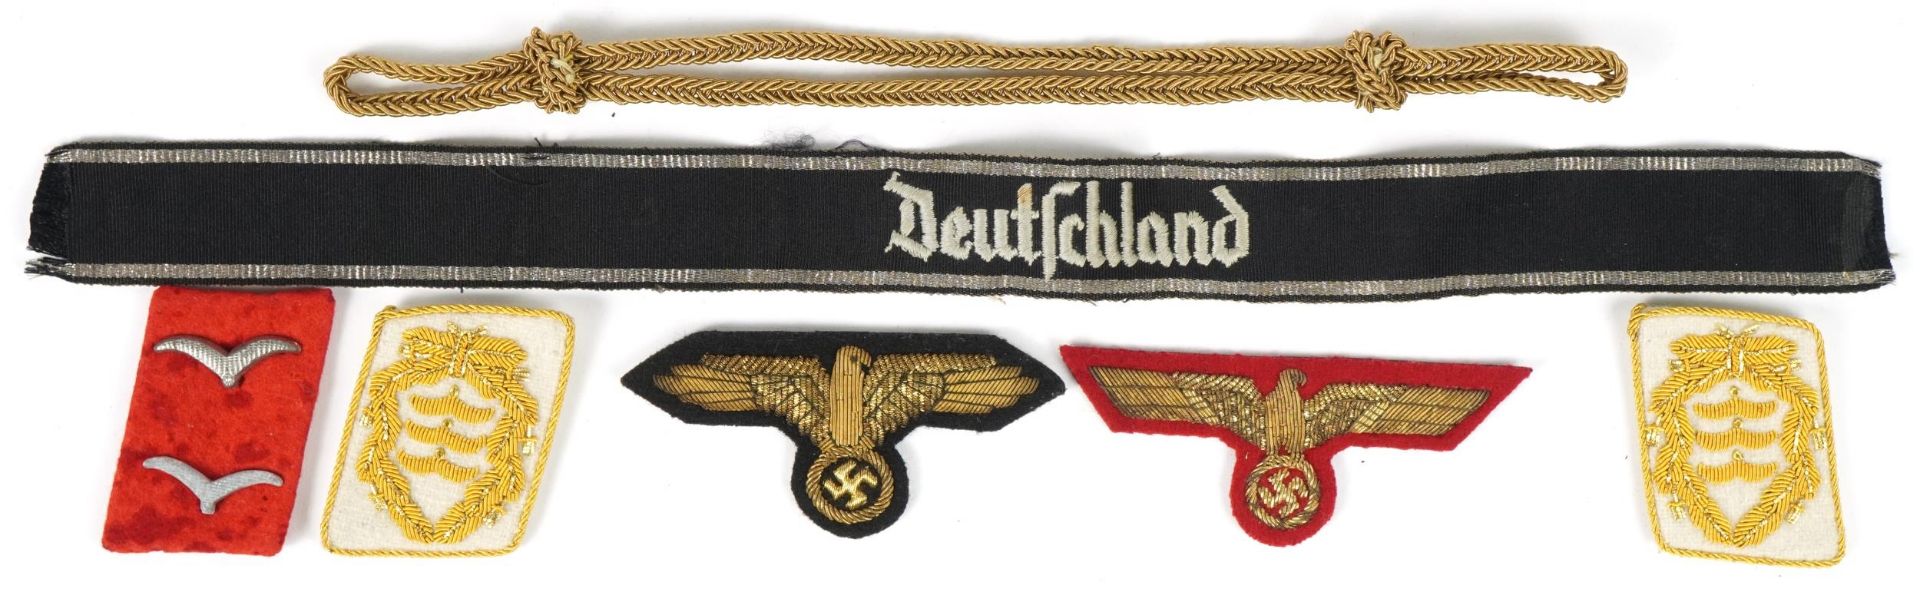 German militaria including two breast eagle cloth badges : For further information on this lot